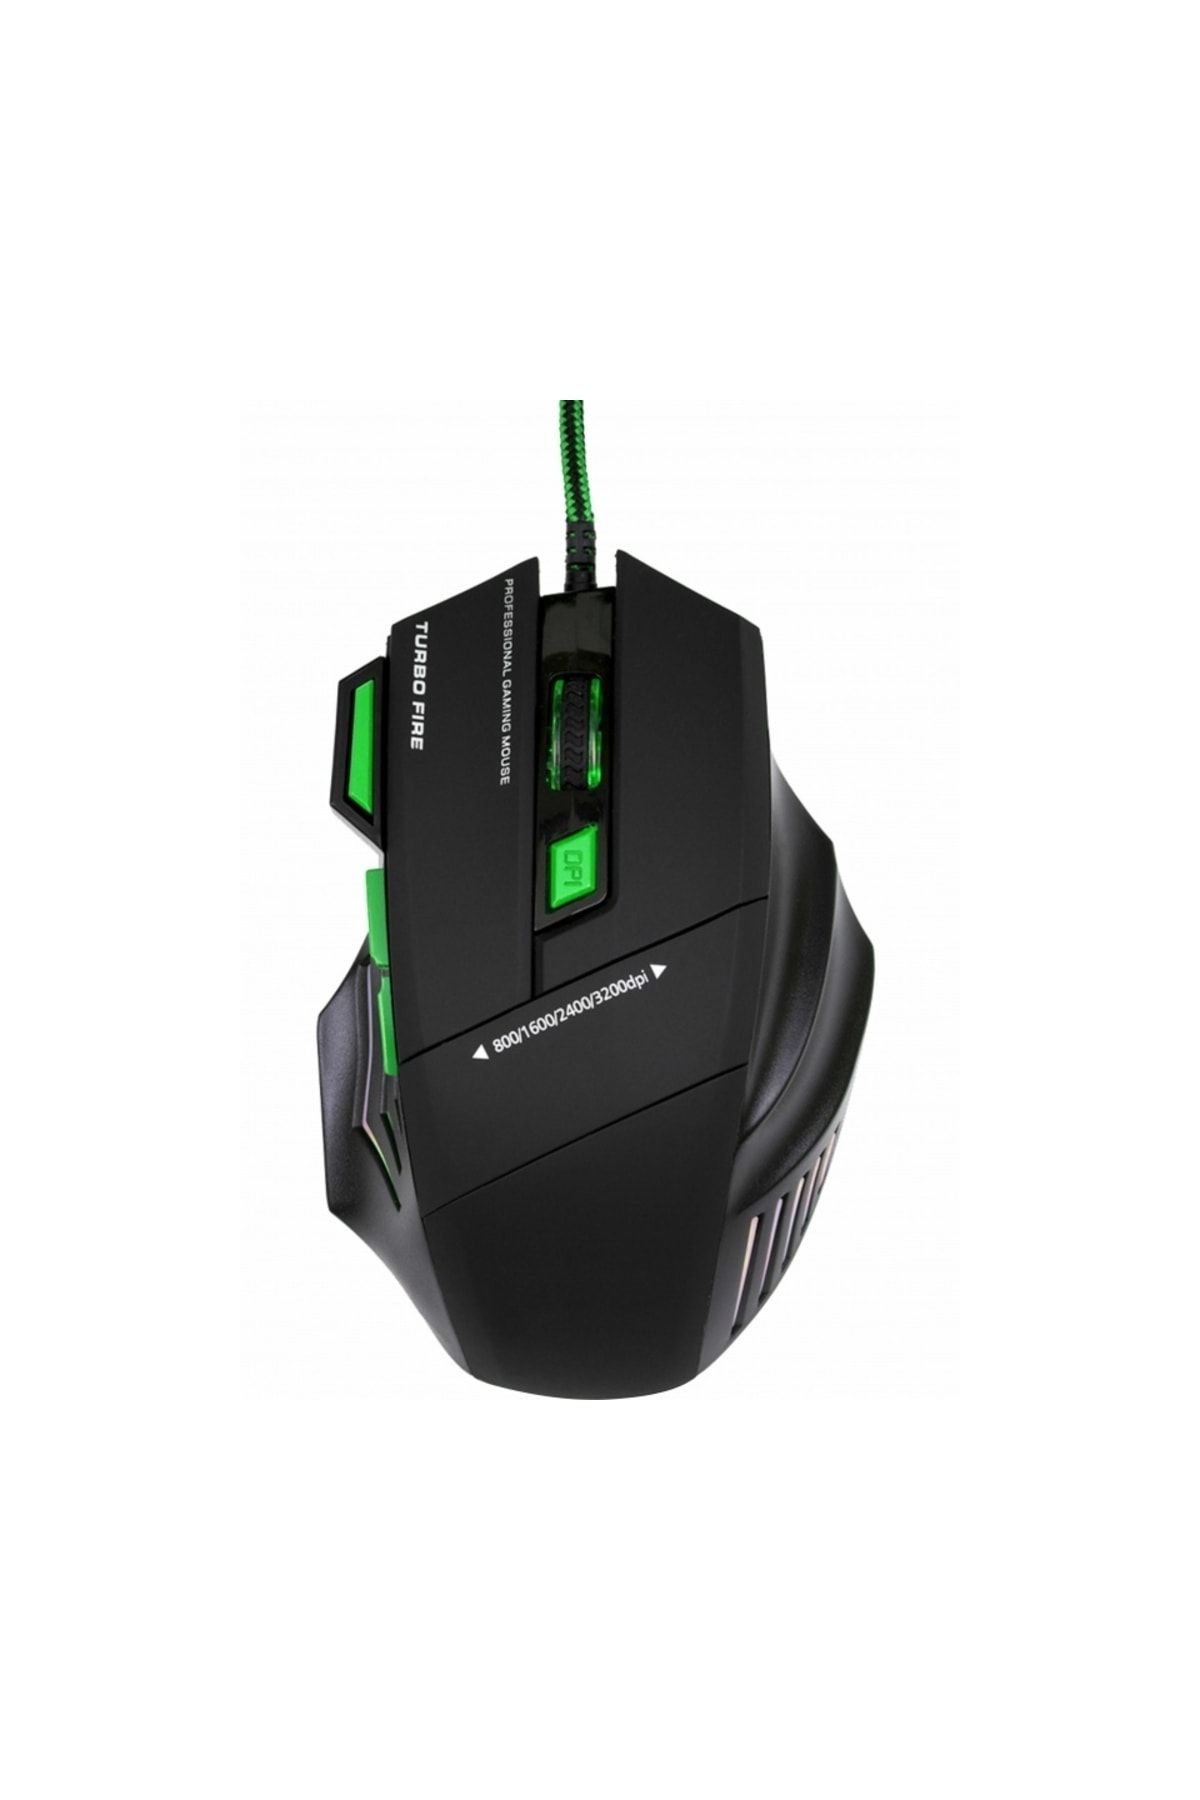 Concord A-9s Gaming Mouse